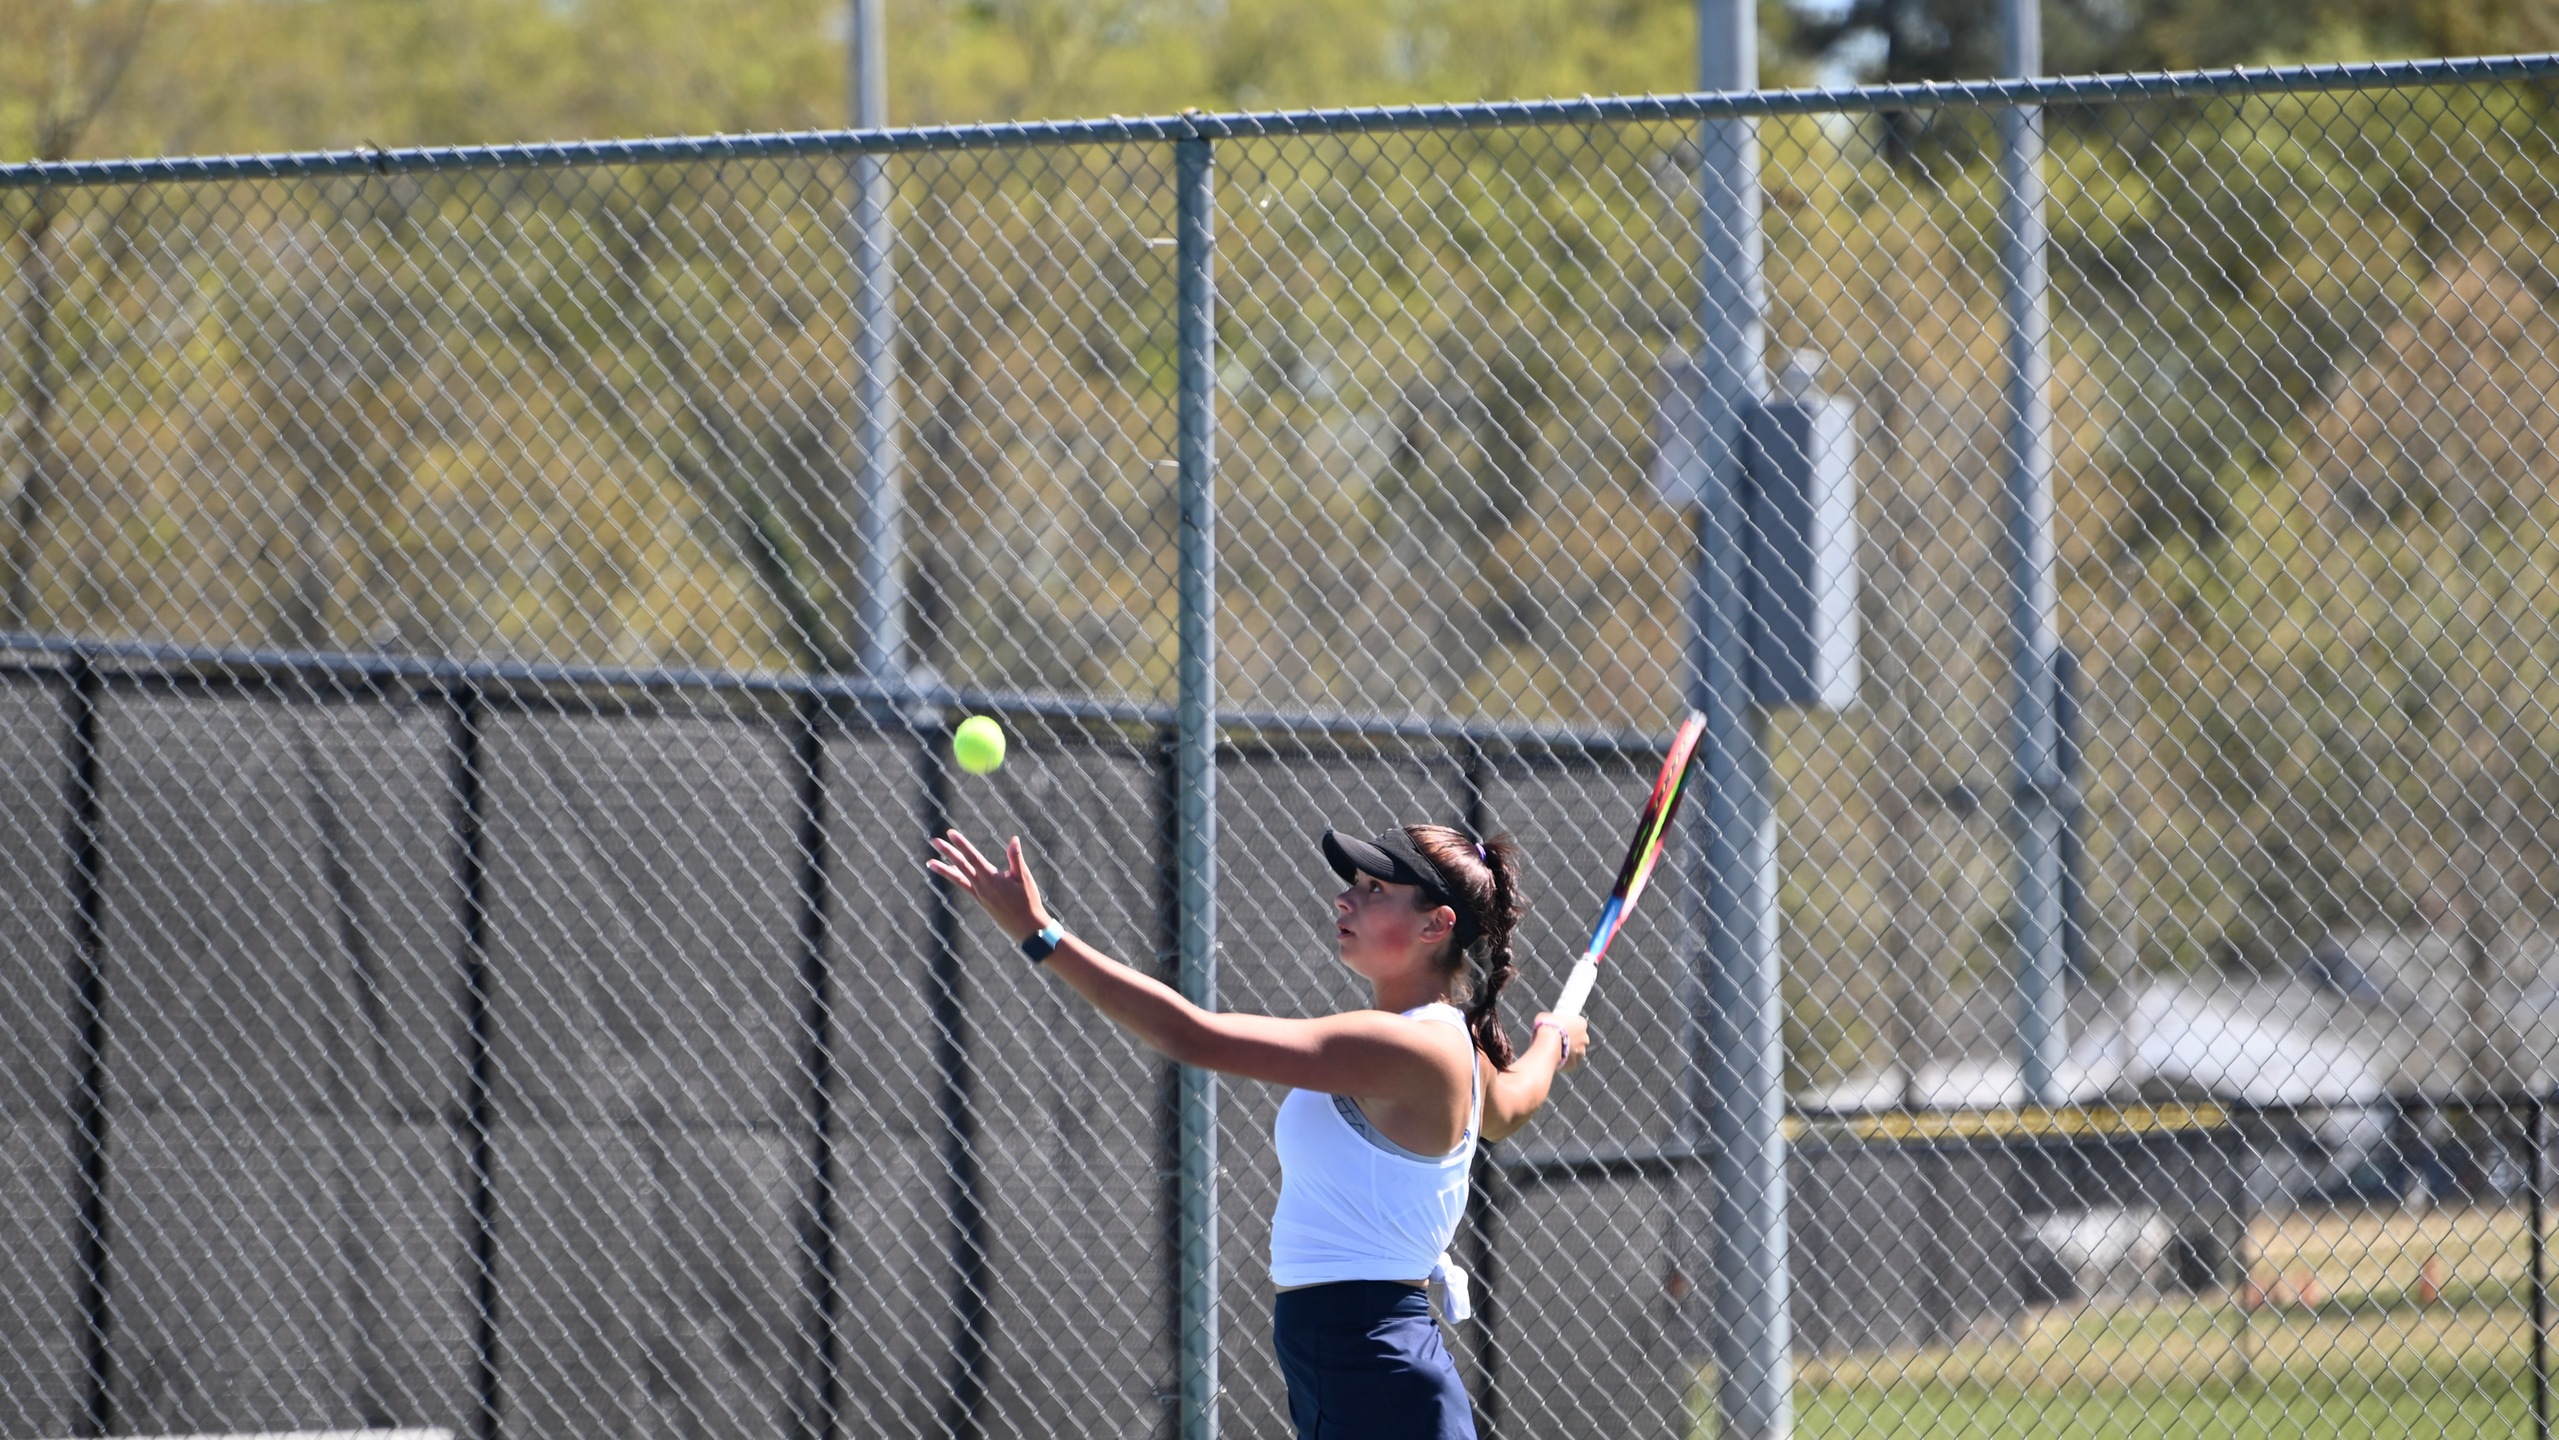 Women’s Tennis Brings Home the Victory on the Road